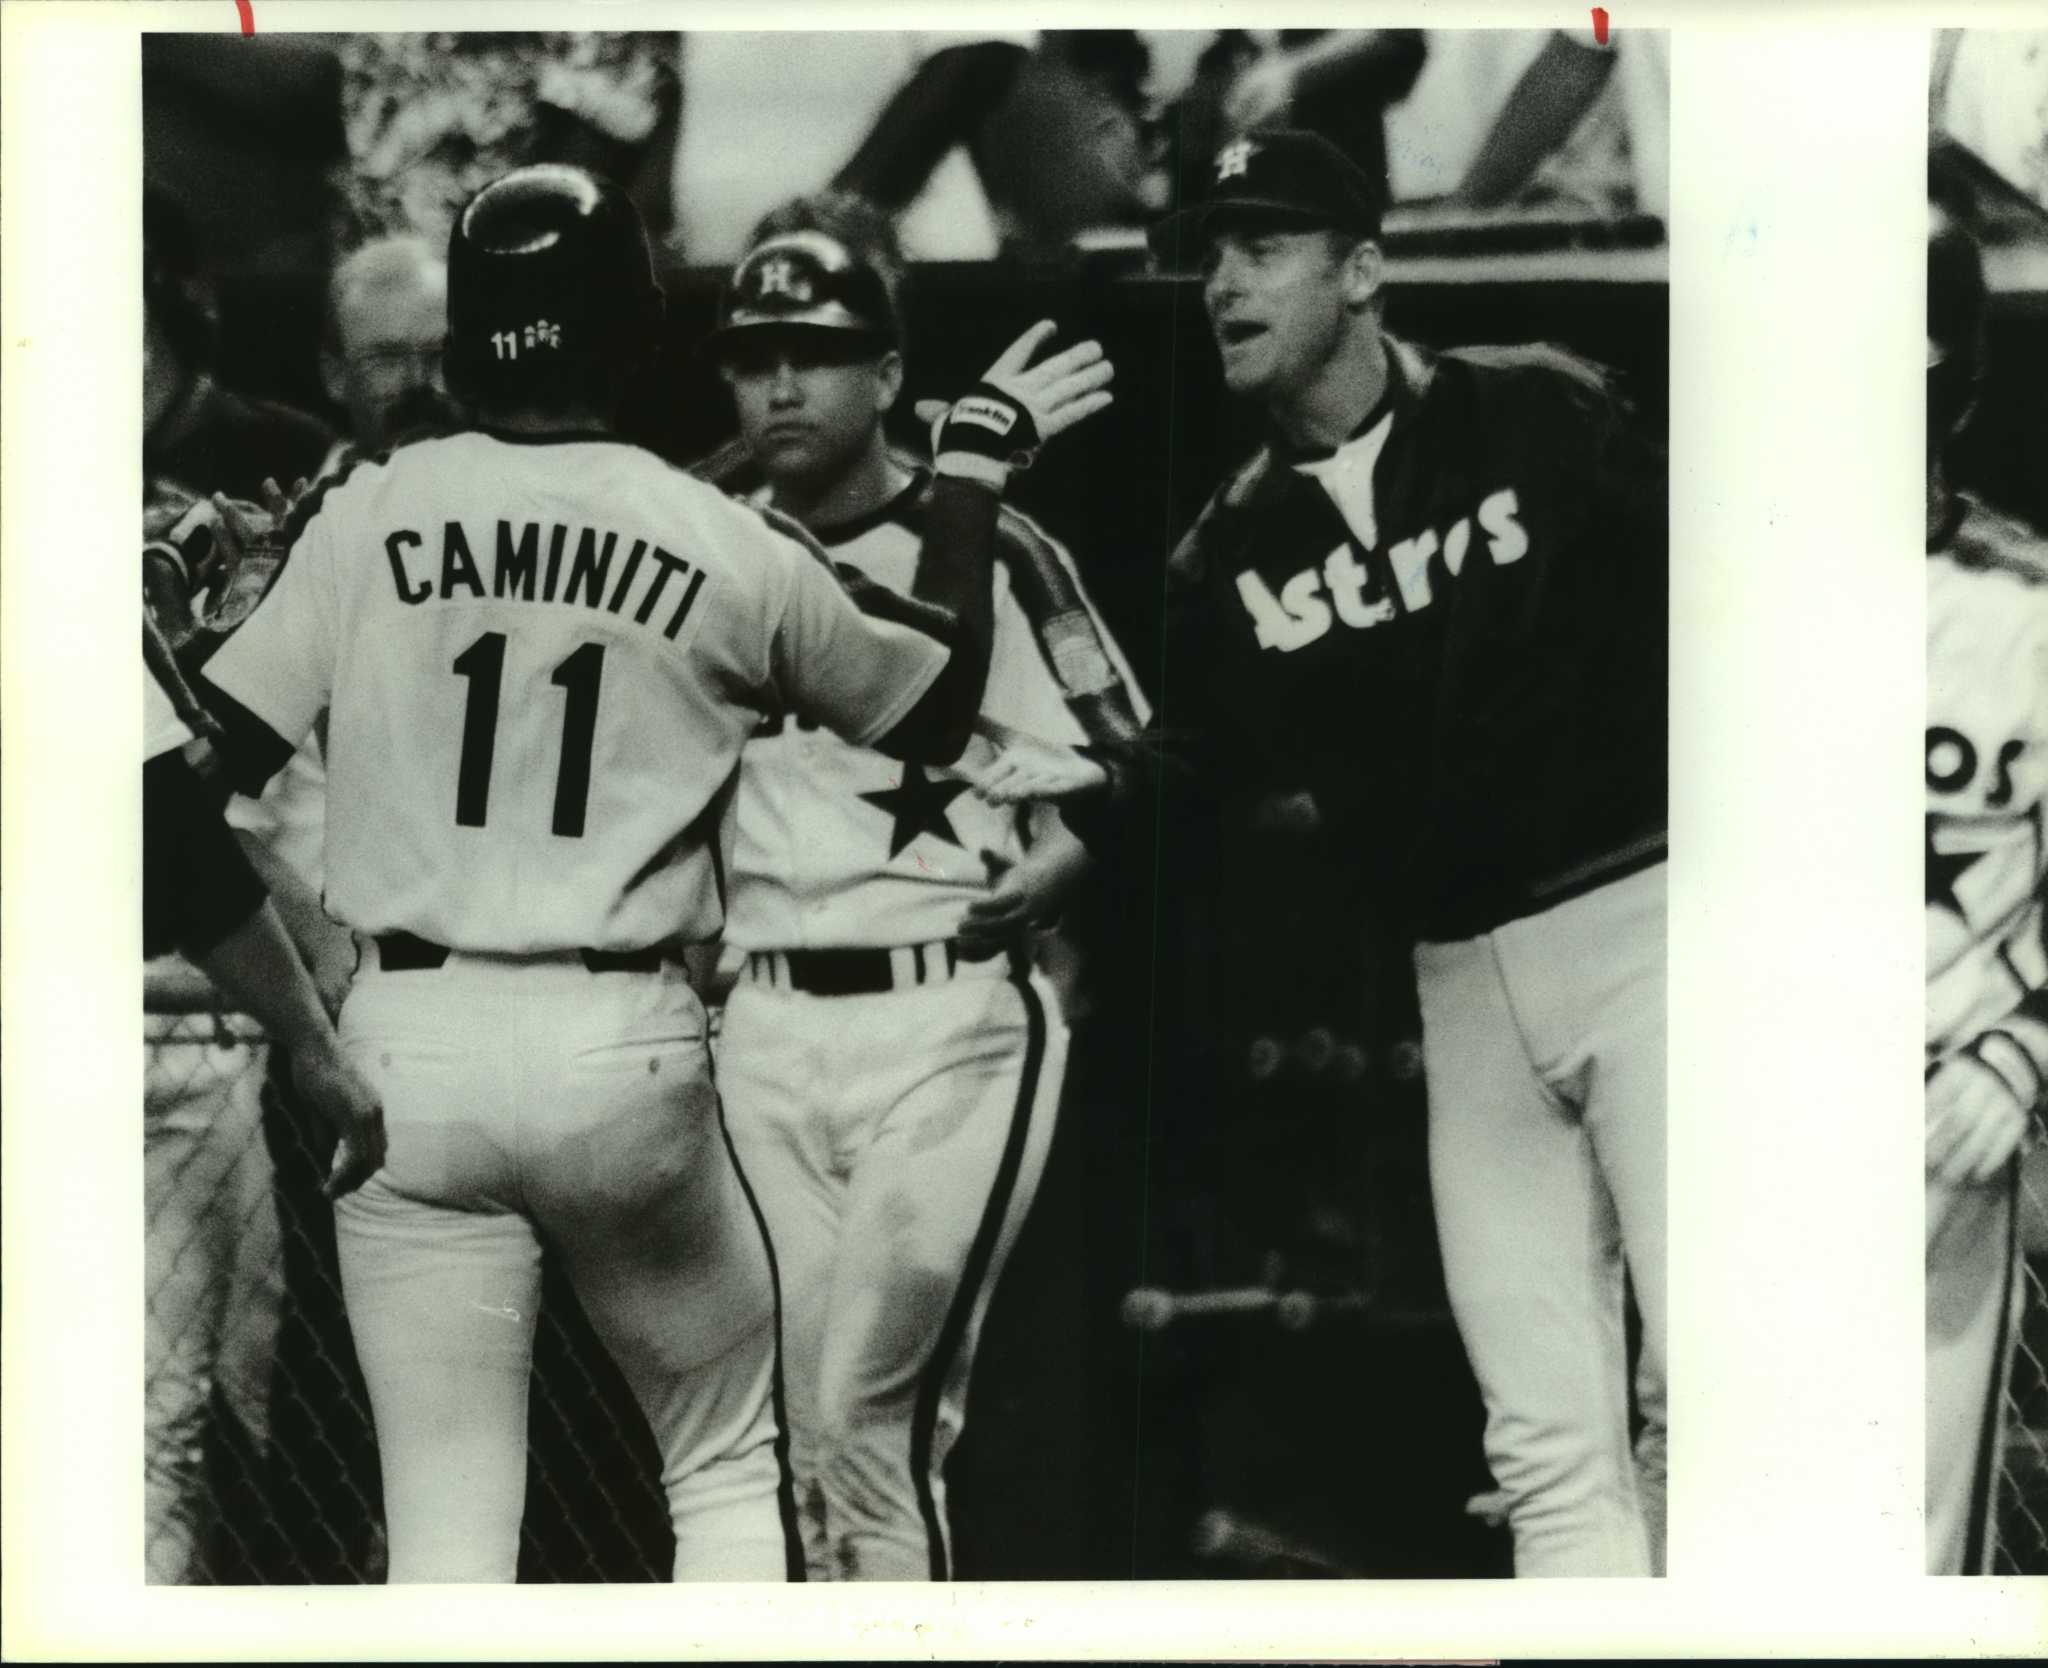 10 things we learned about former Astros star Ken Caminiti in new